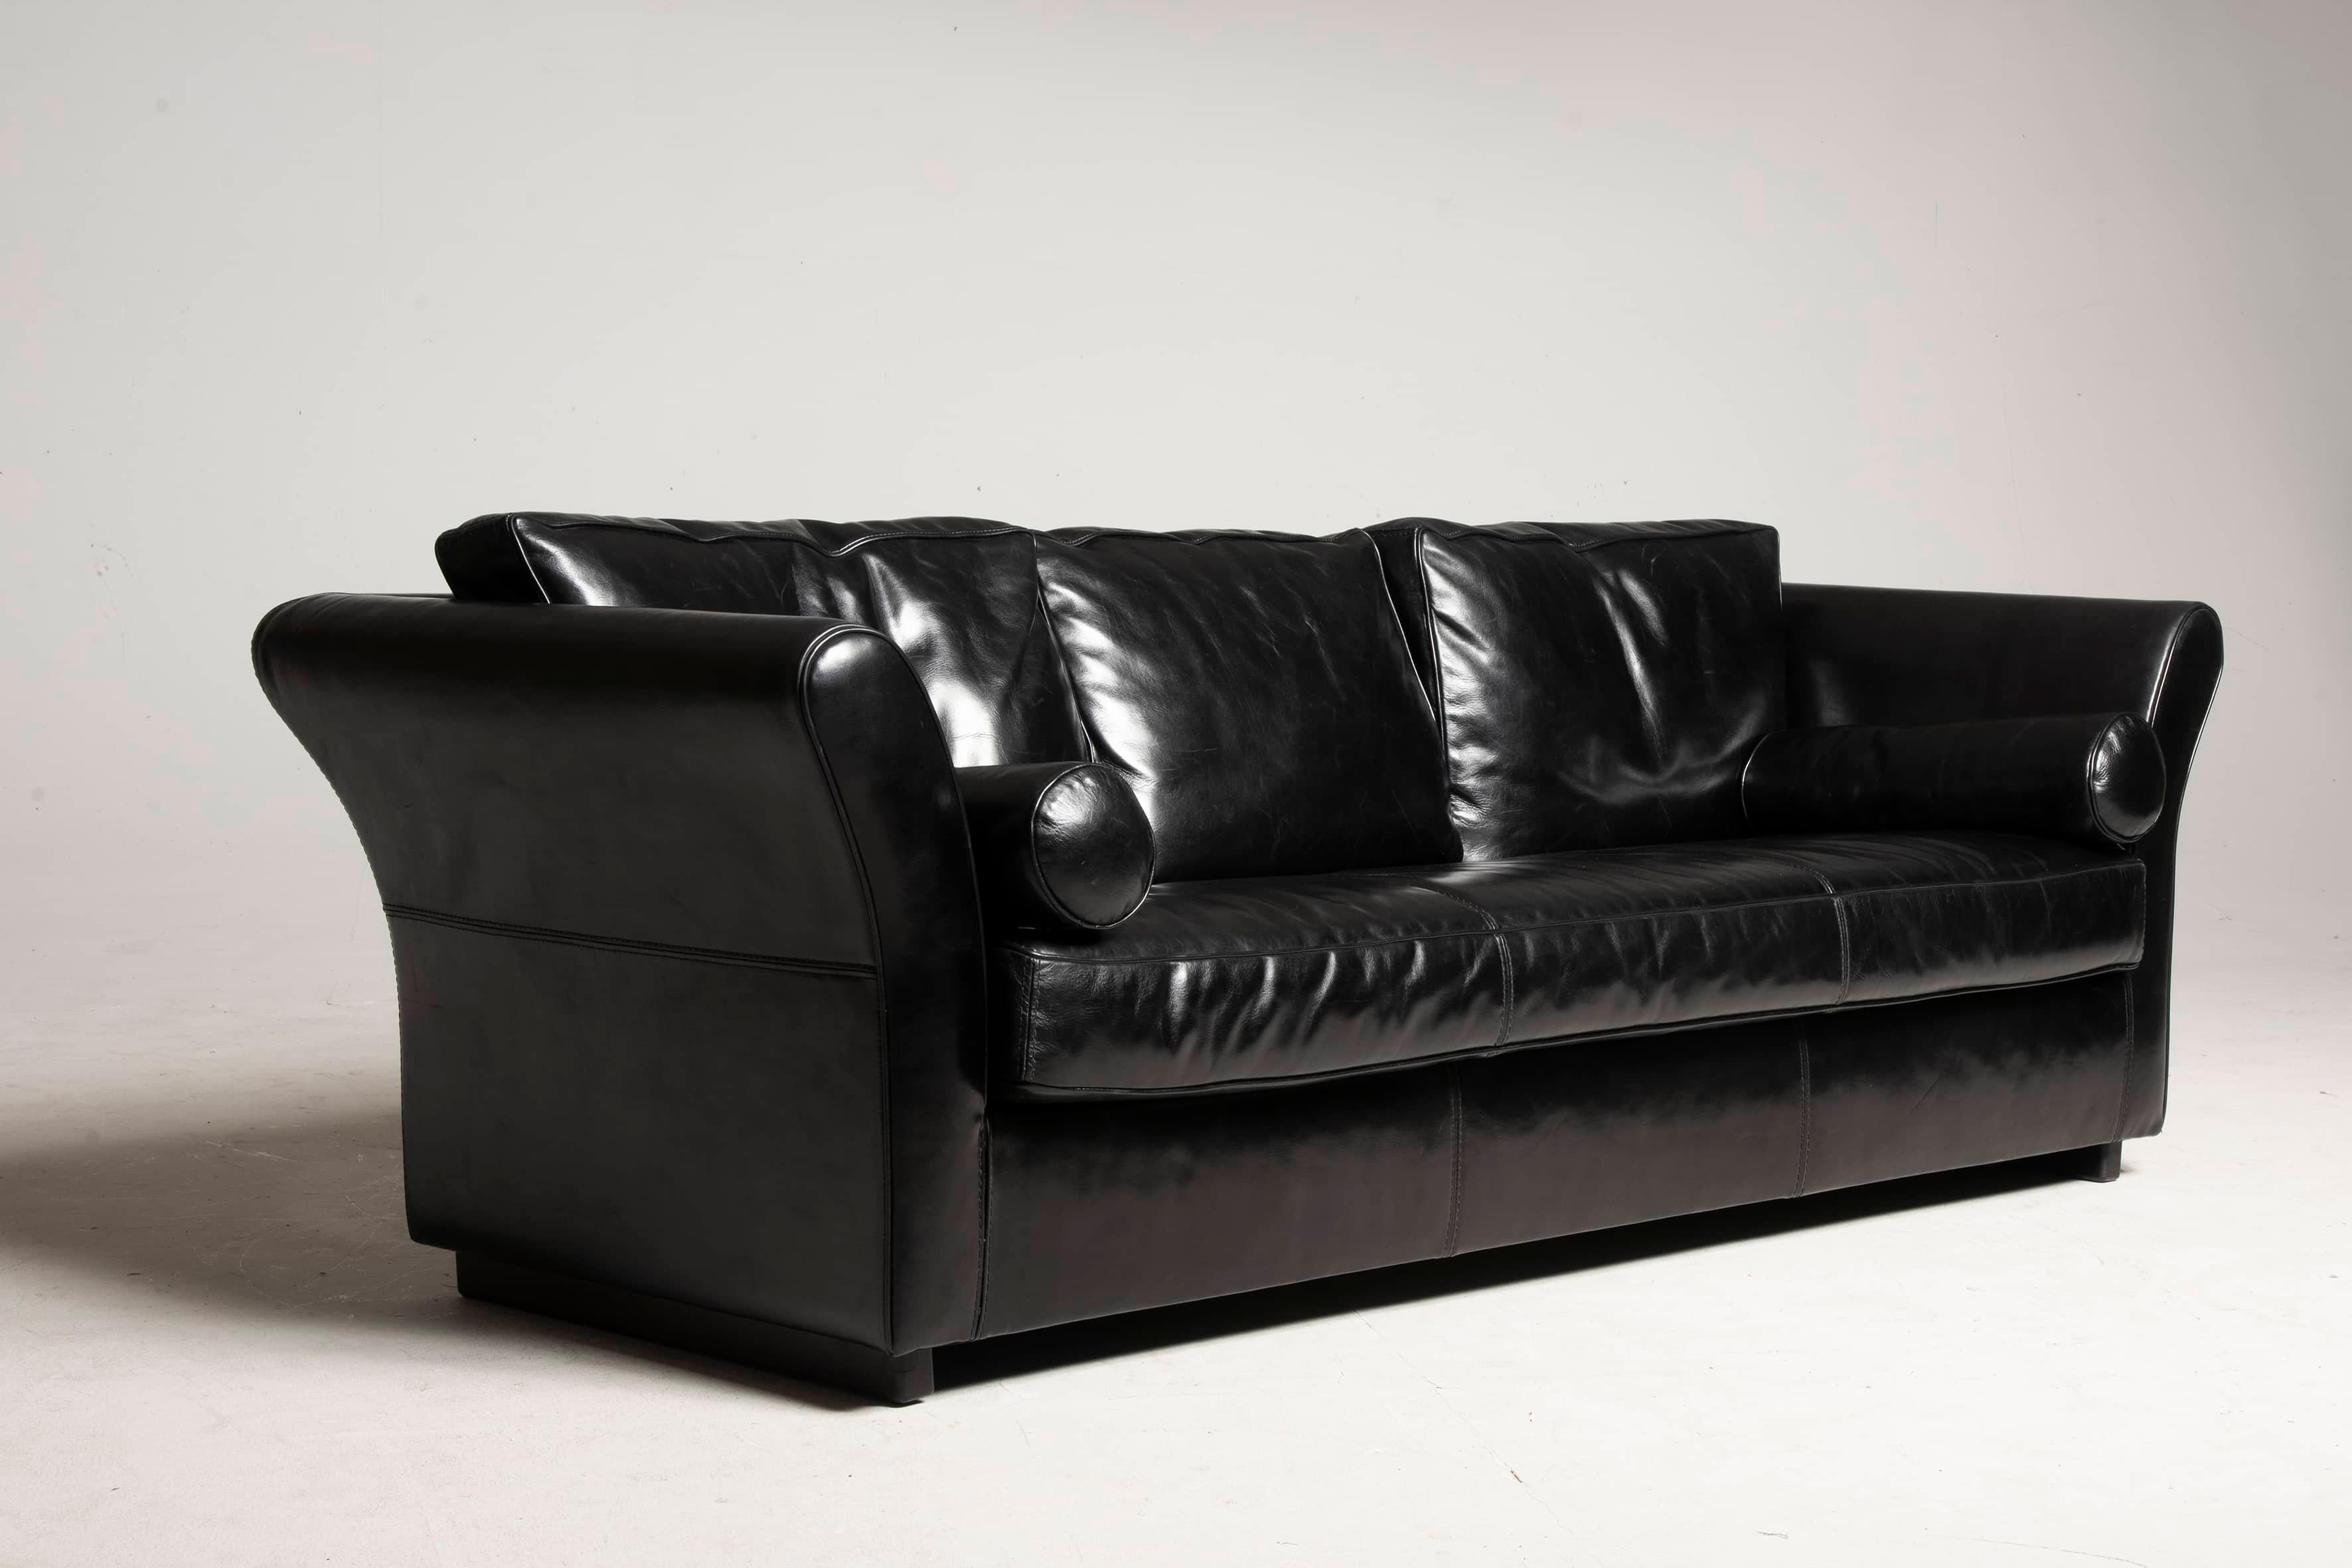 Contemporary Baxter Sofa Black Polished Leather Three Seater Diner Model For Sale